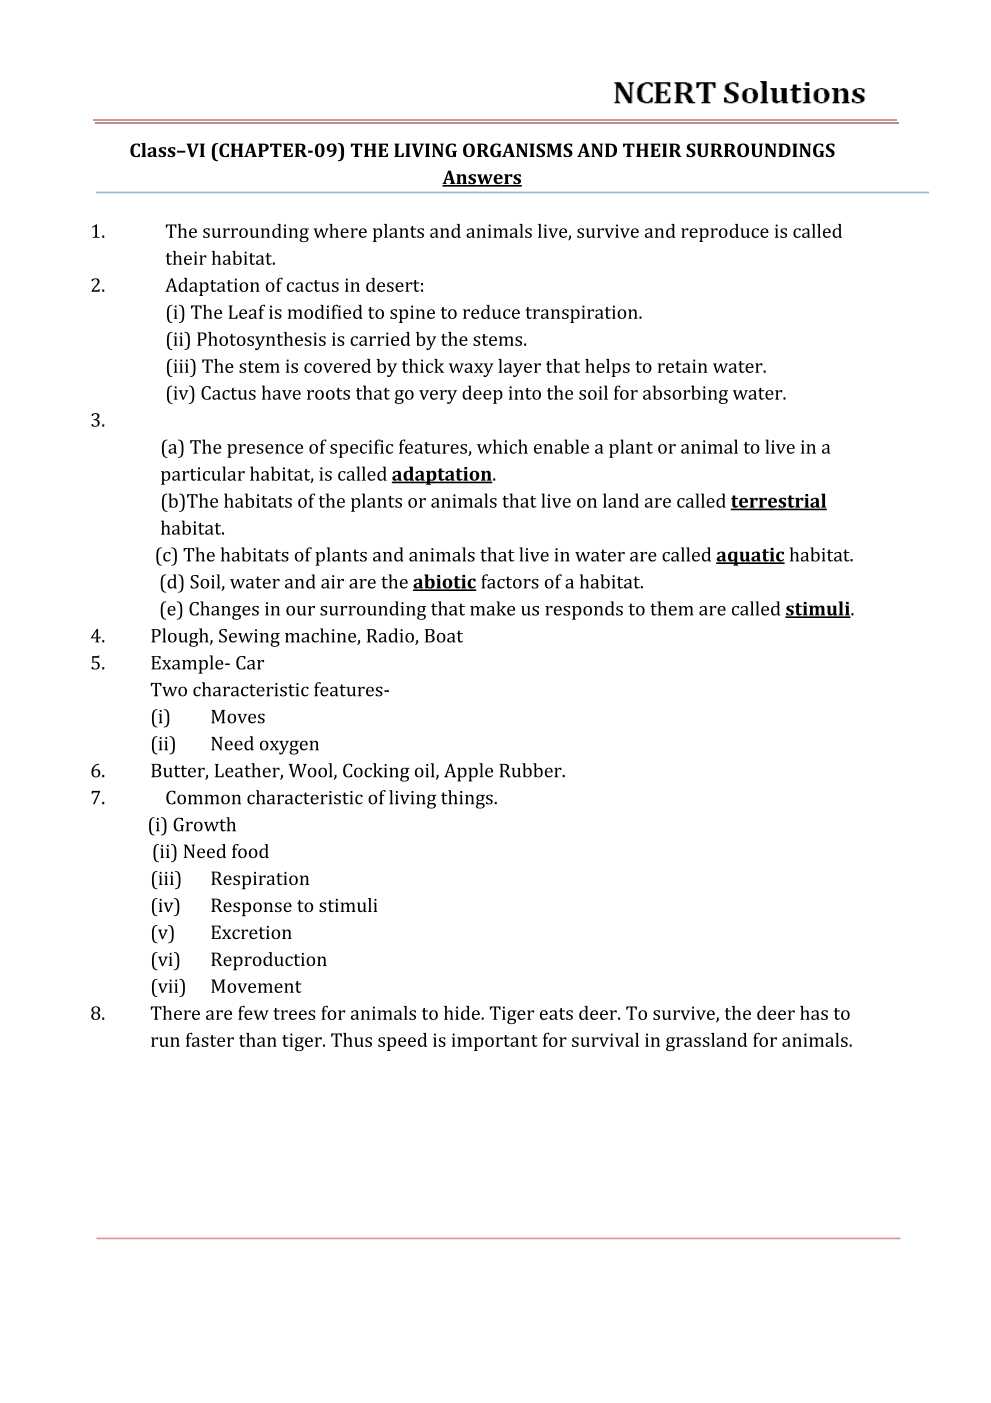 NCERT Solutions For Class 6 Science Chapter 9